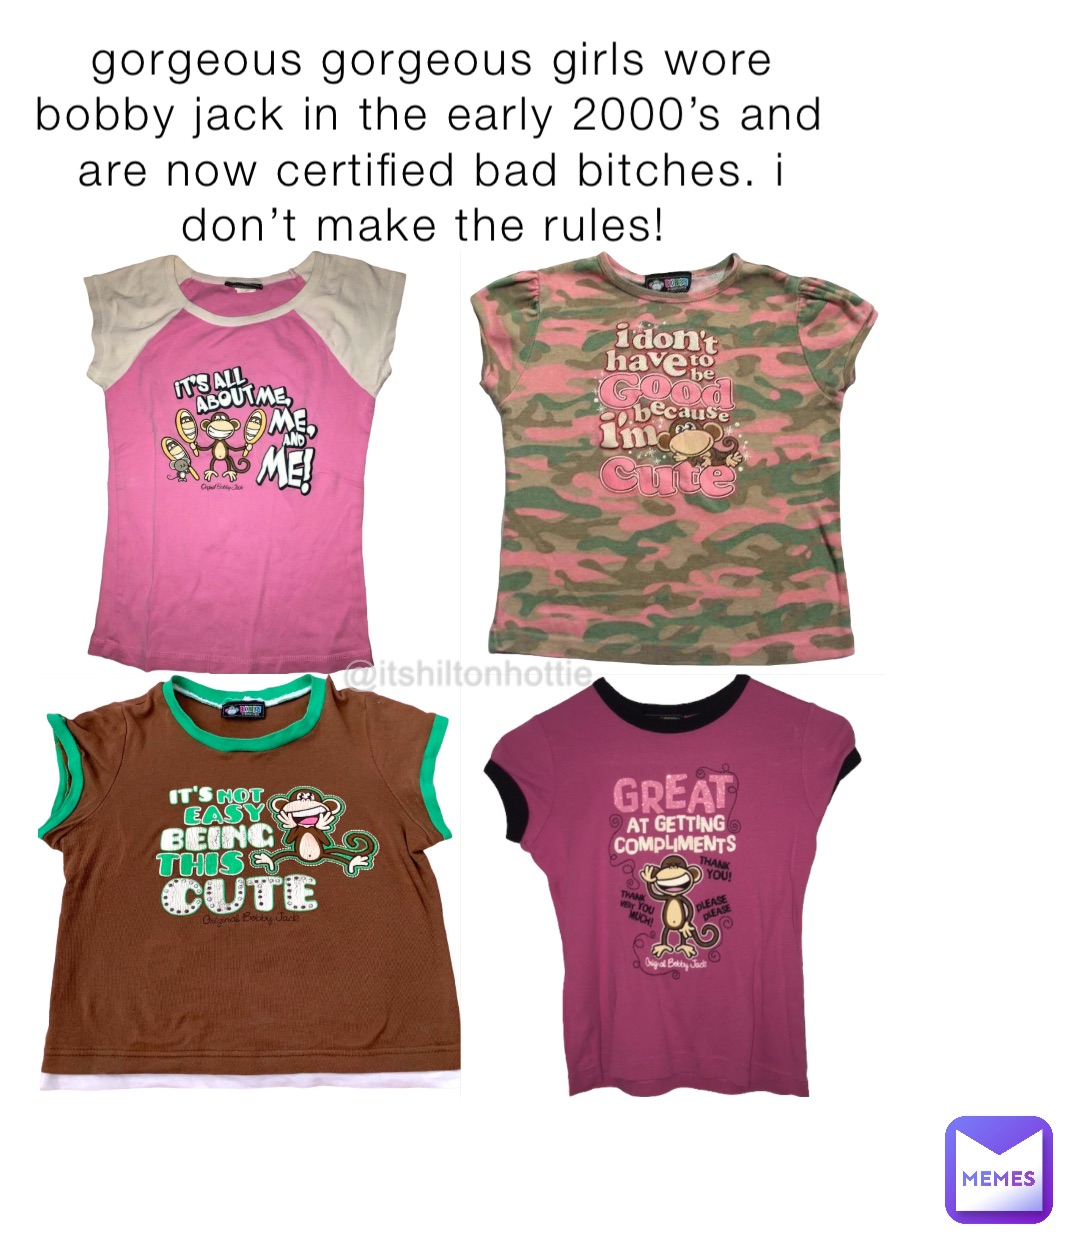 gorgeous gorgeous girls wore bobby jack in the early 2000’s and are now certified bad bitches. i don’t make the rules!